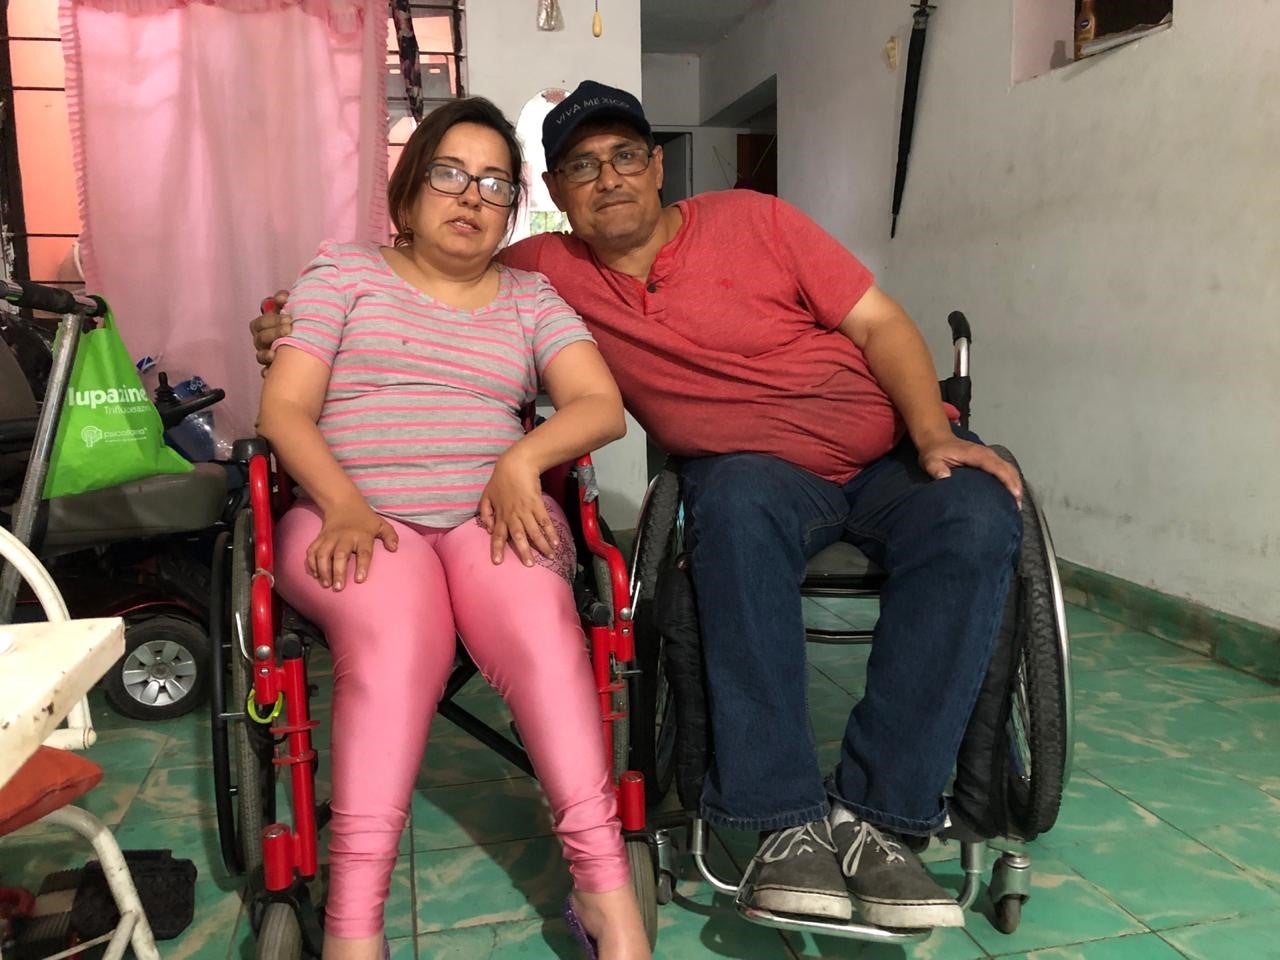 Reyna (left) and Cesar, who have physical disabilities, each said they survived violence by their family members. They live together in Monterrey, Nuevo León state. © 2019 Libertad Hernández